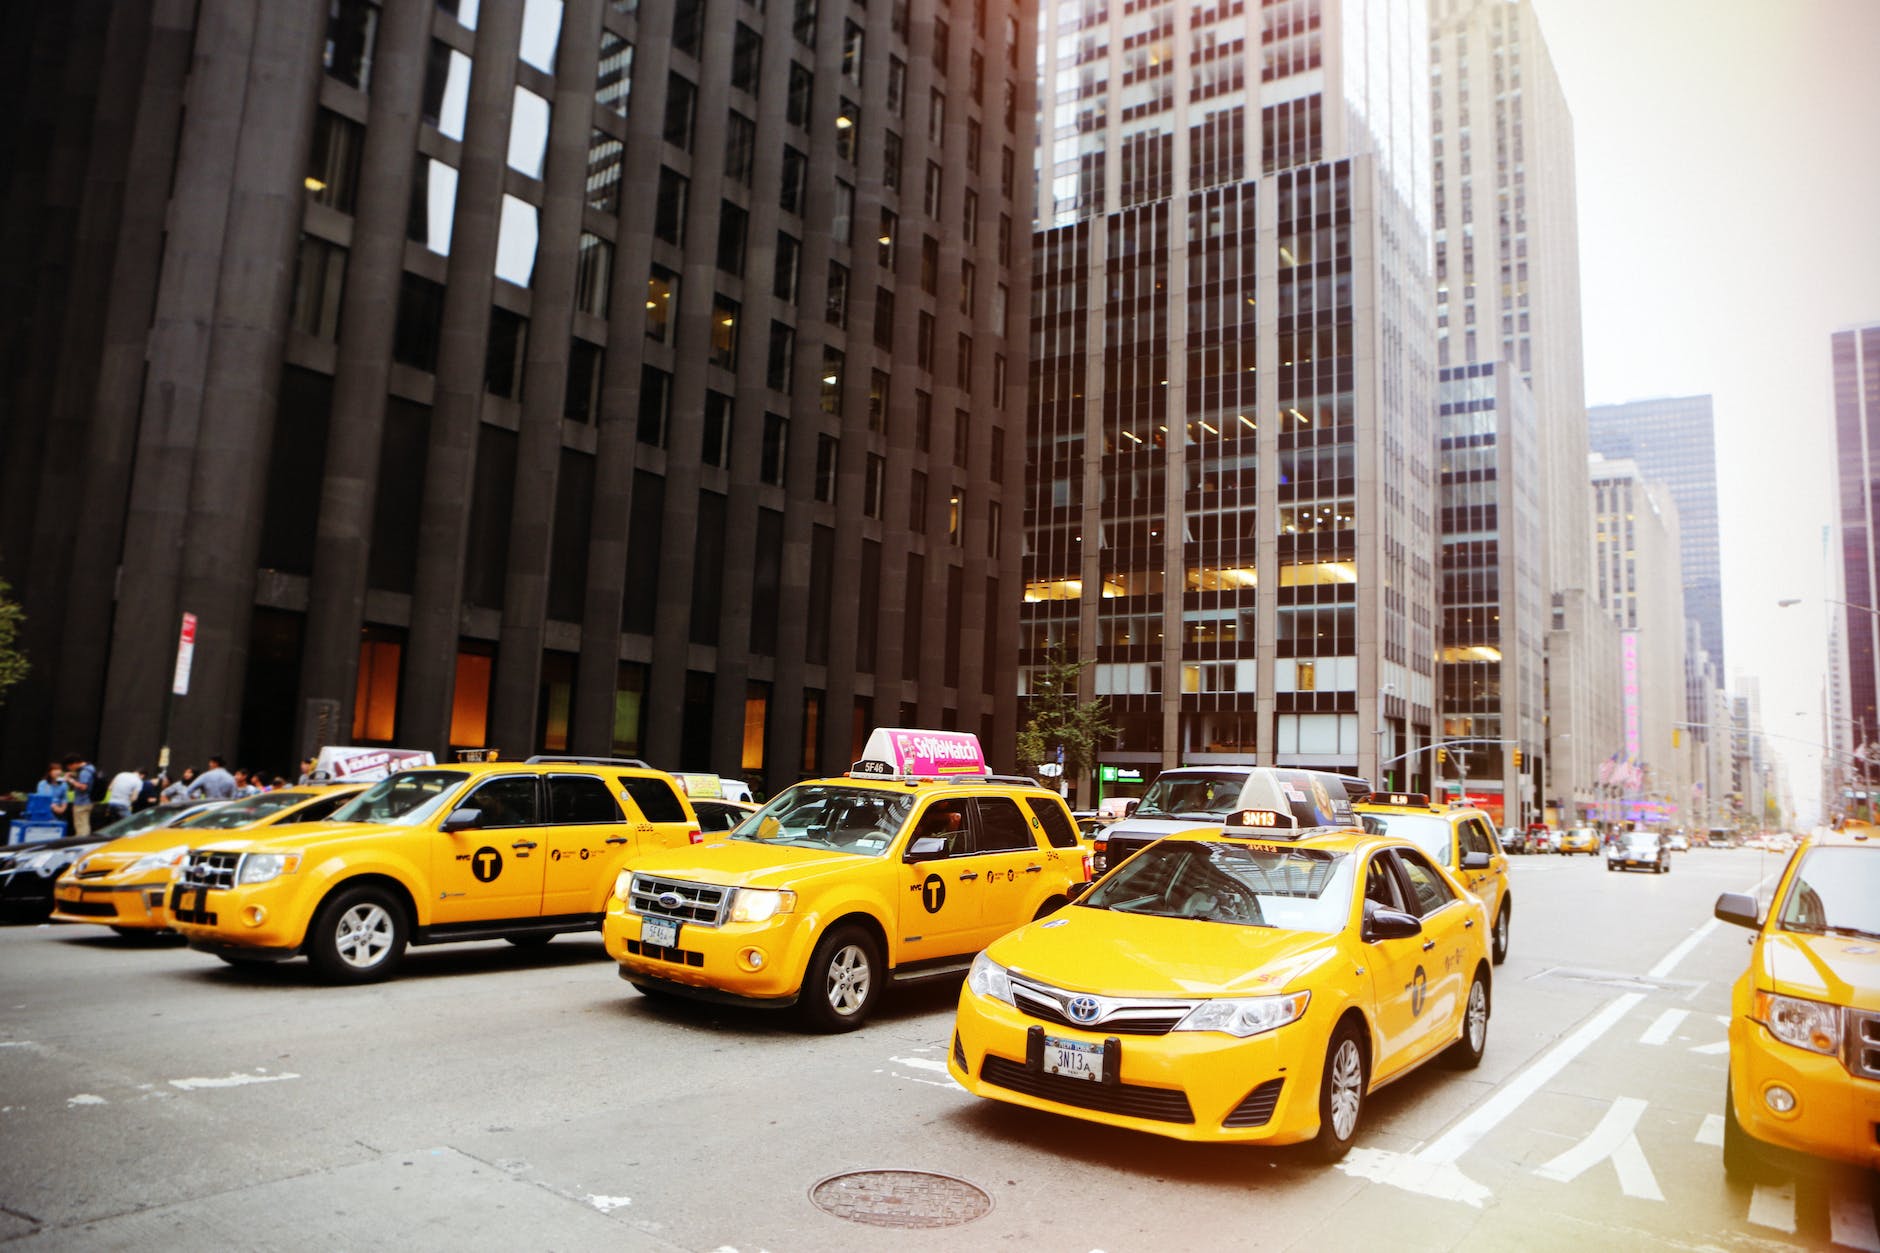 Inverness Executive Taxi Cabs: Your Ultimate Choice for Premium Transportation Solutions